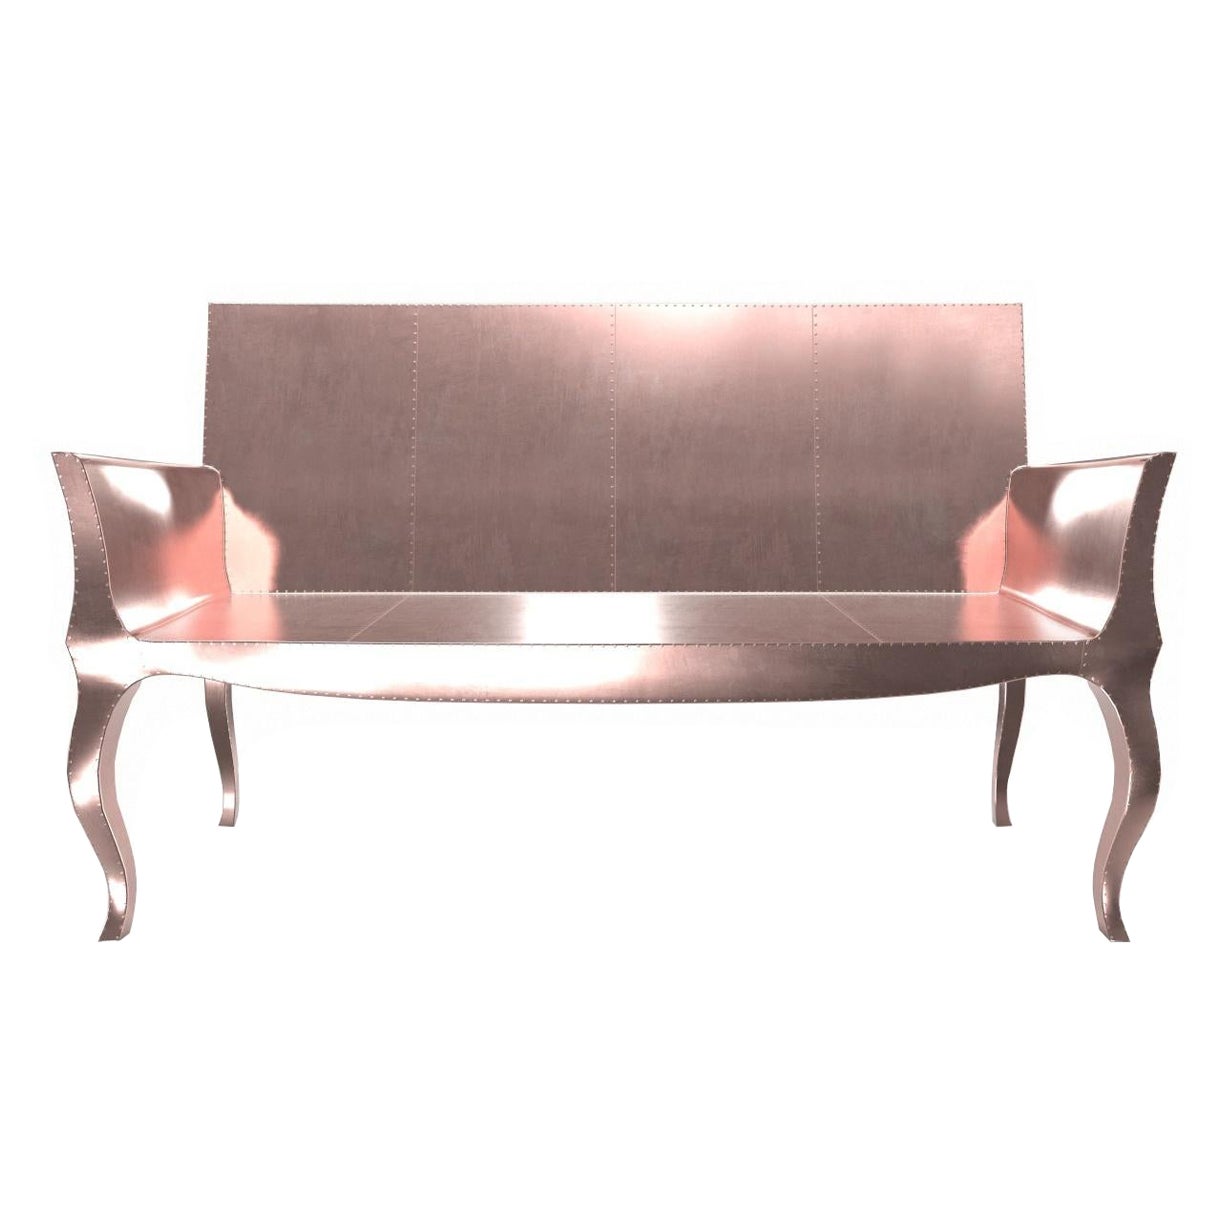 Louise Settee Art Deco Canapes in Smooth Copper by Paul Mathieu for S Odegard